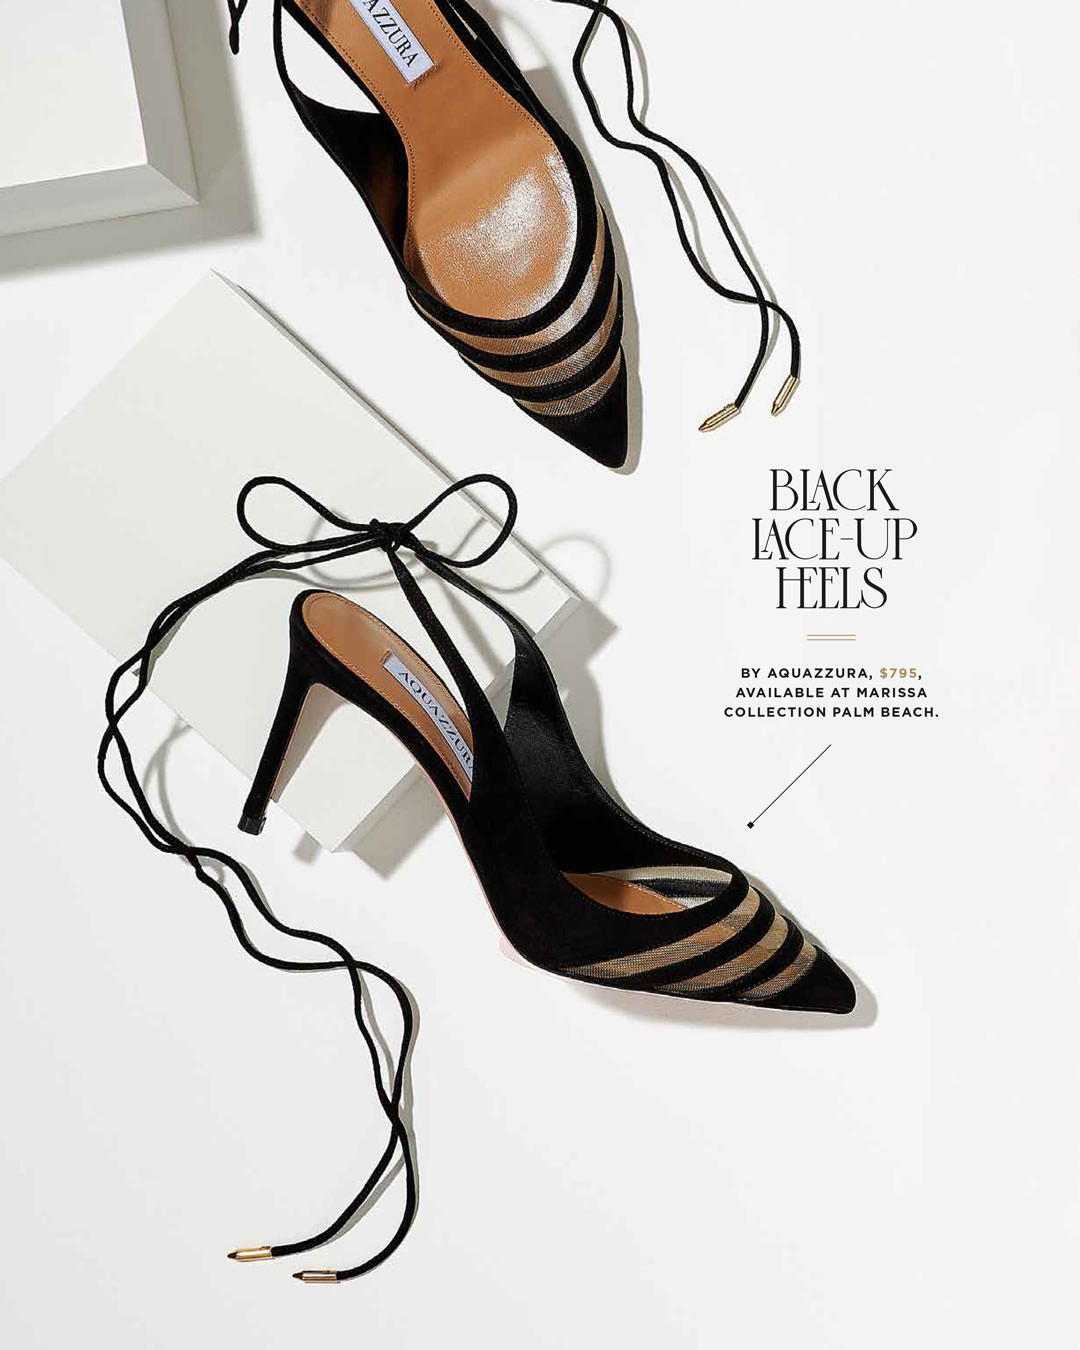 Editorial Fashion Product Photography of Back Shoes on White Background for Fort Lauderdale Magazine